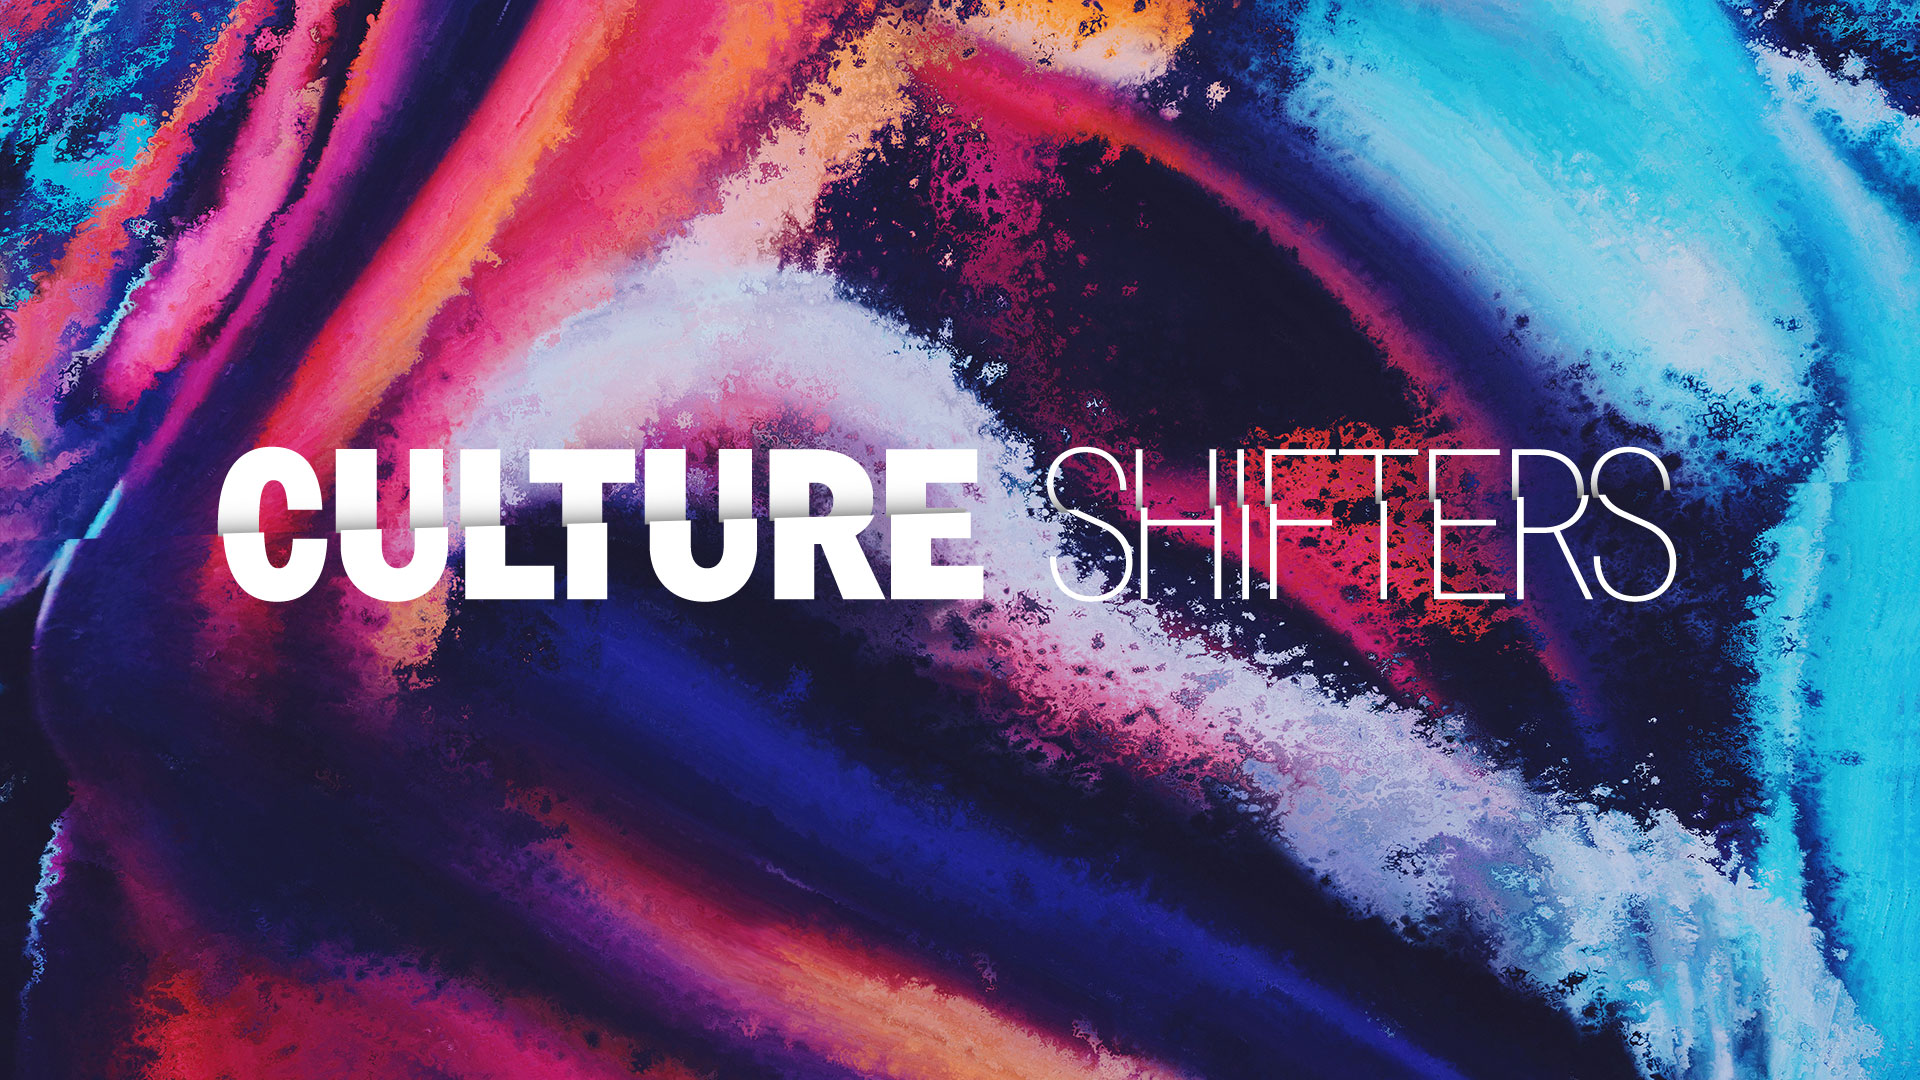 Culture Shifters - Ps. Leanne Matthesius